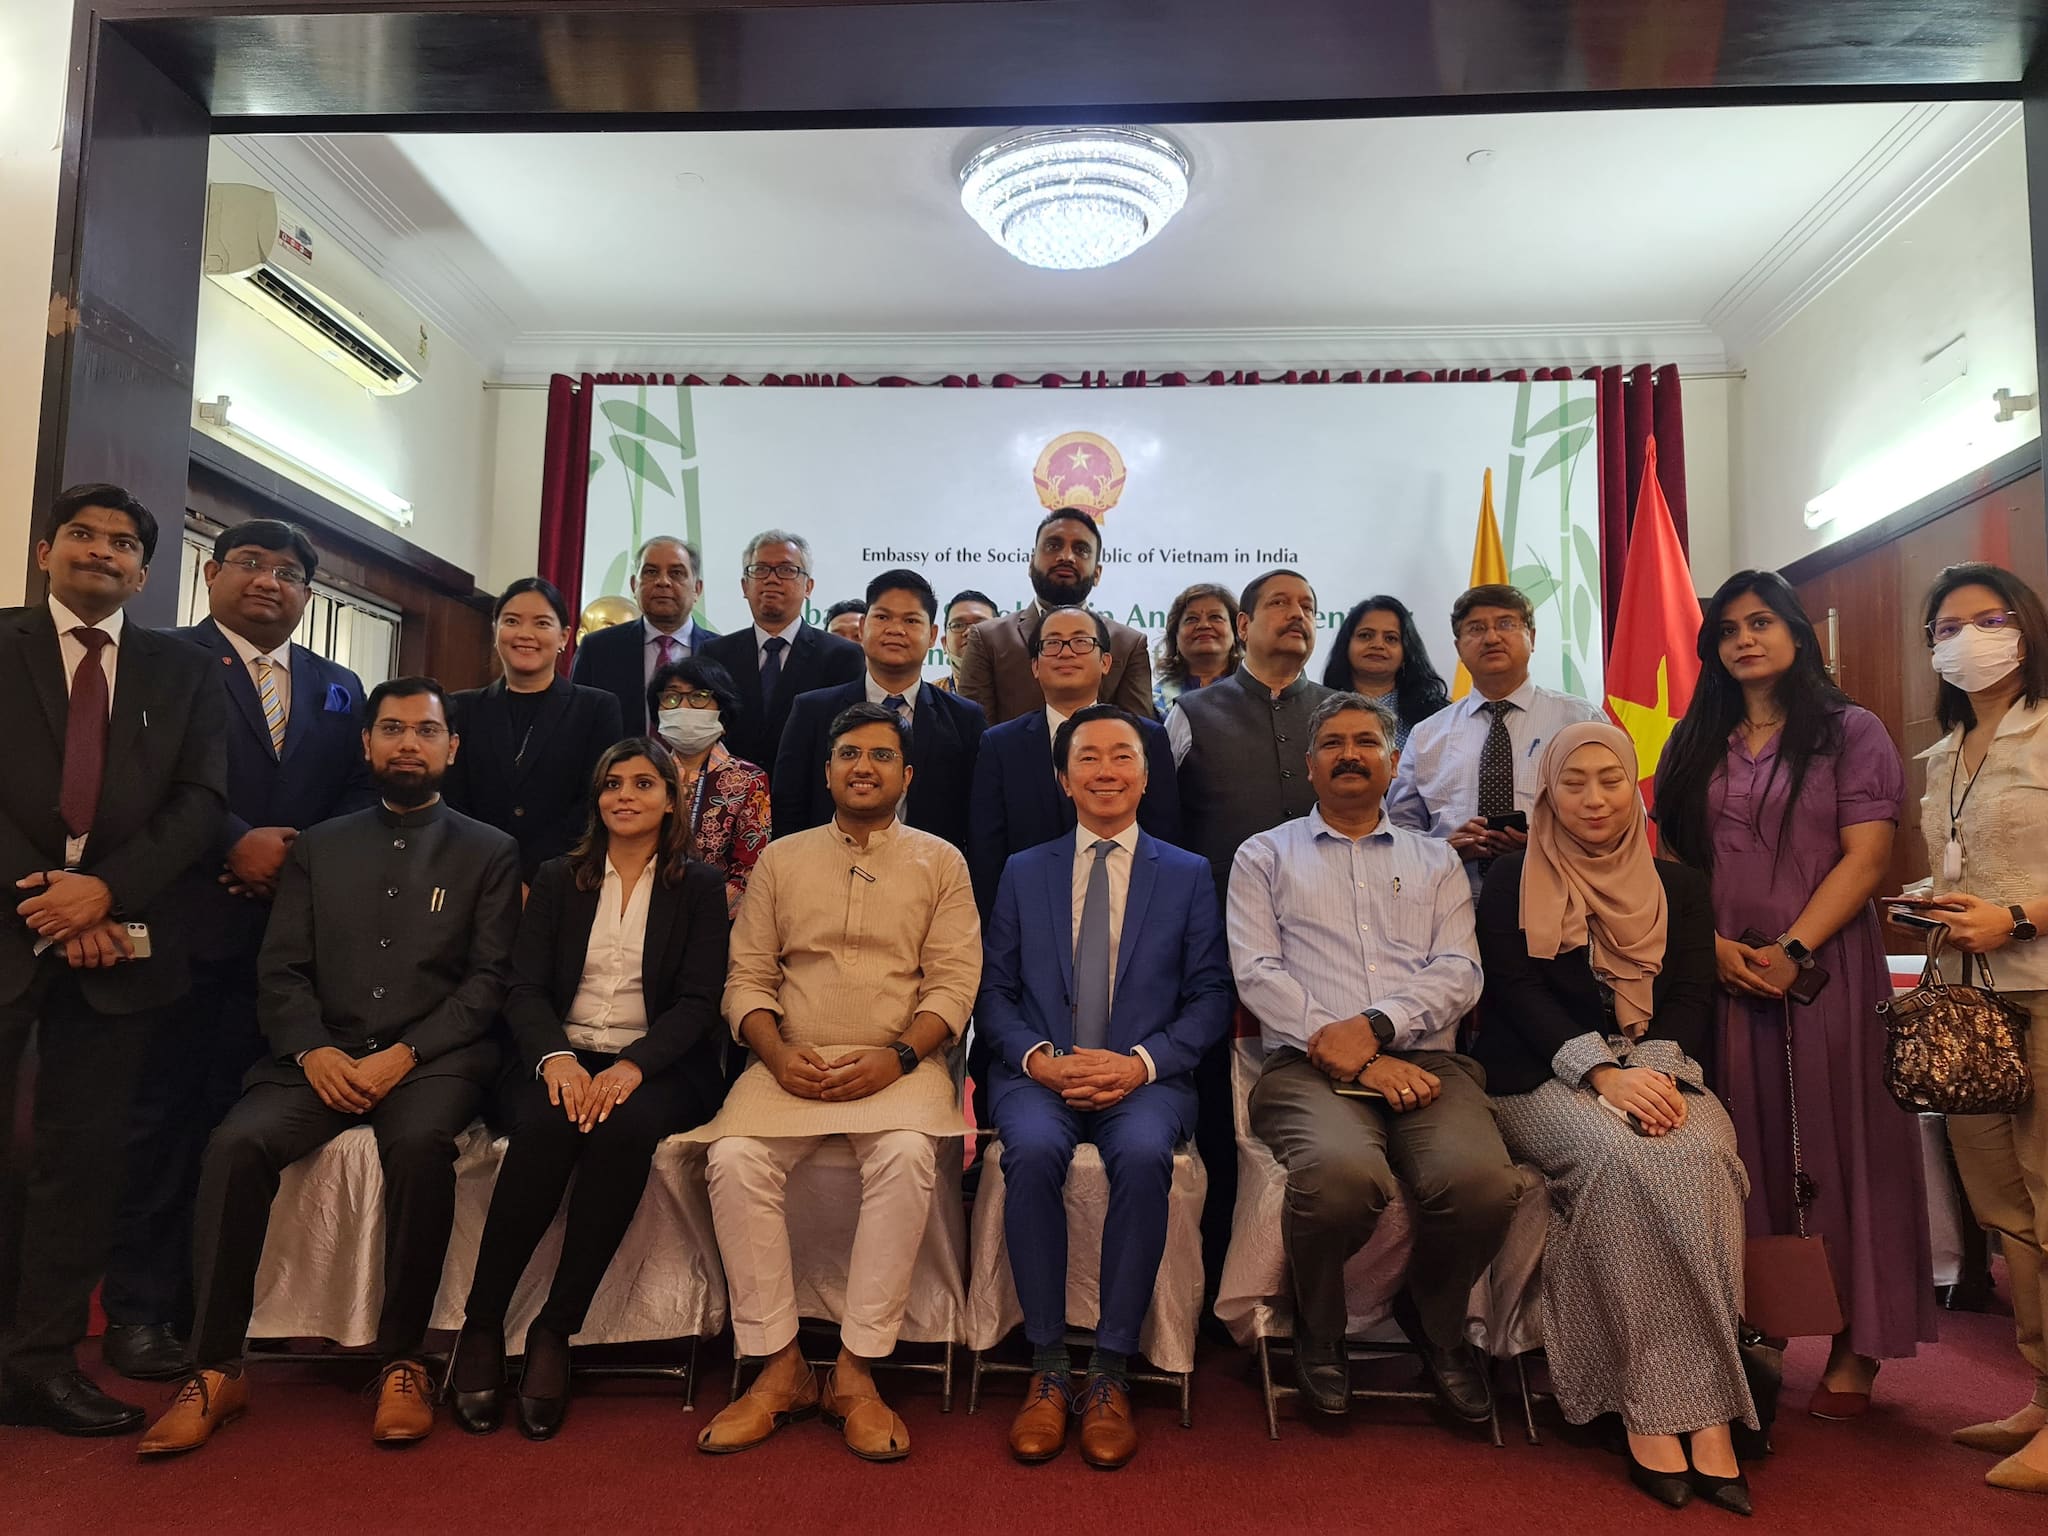 Ambassador Pham Sanh Chau (in blue) at the MoU signing ceremony in New Delhi on May 17, 2021.